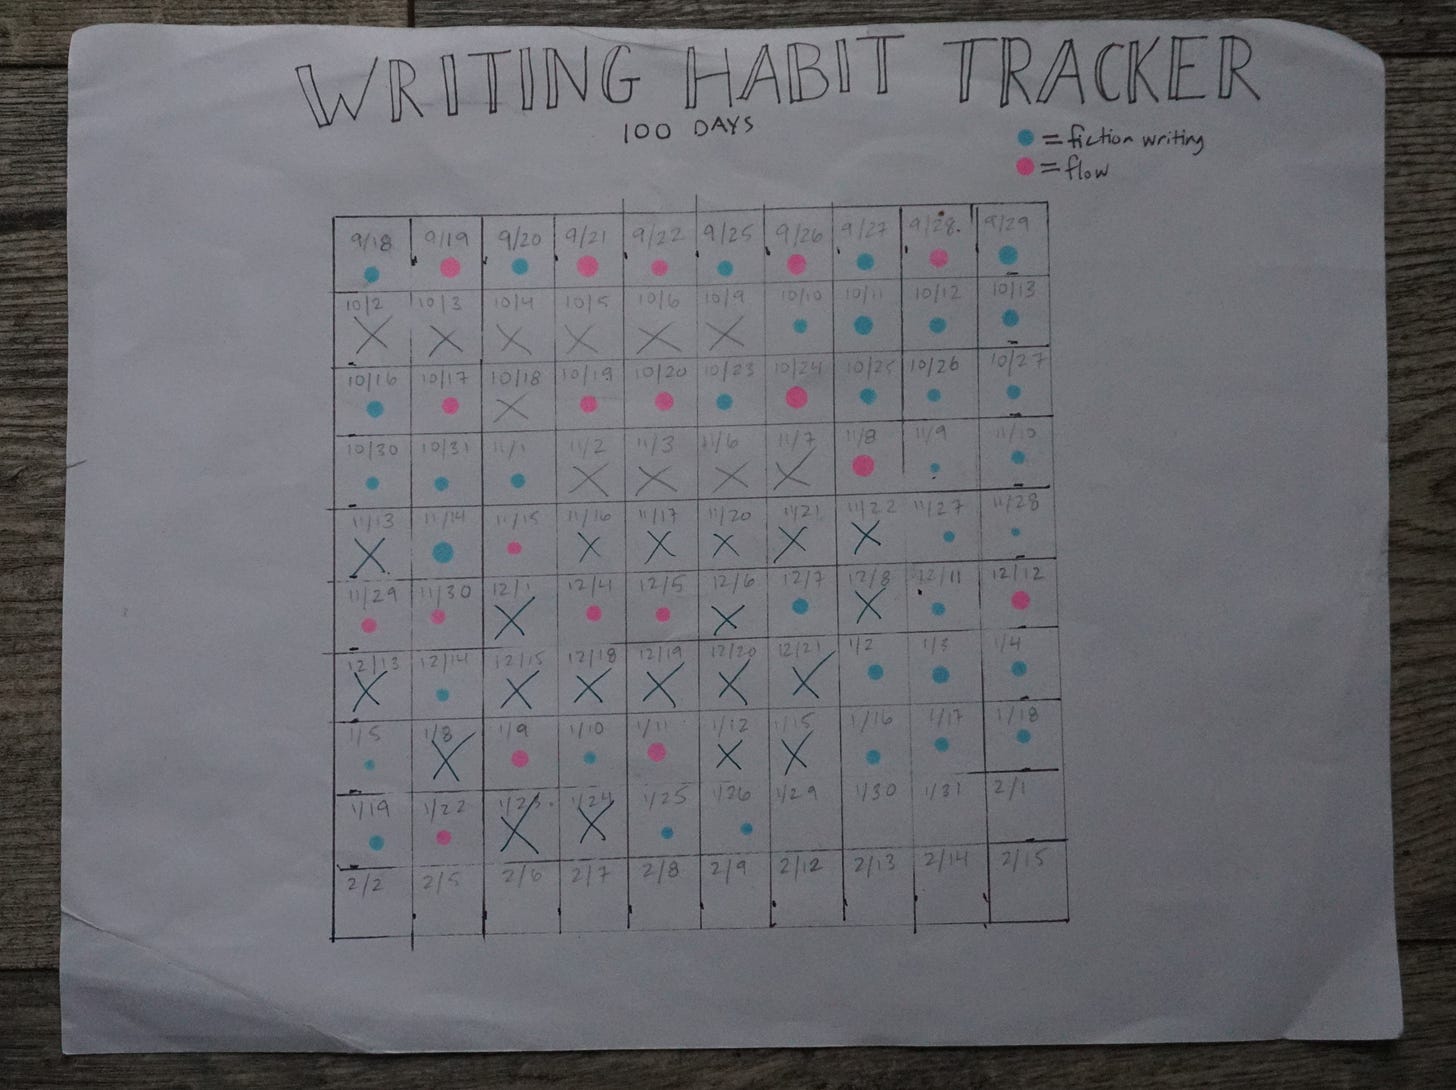 A paper habit tracker. At the top it says "Writing Habit Tracker: 100 Days." There are blue dots for when I get writing done, and pink dots or when I get into flow. And an X when I don't get writing done. There is a 10x10 grid, that's the 100 days. It started on September 18. It ends on February 15. I only did weekdays, and left out holidays when I knew I wouldn't get writing done.